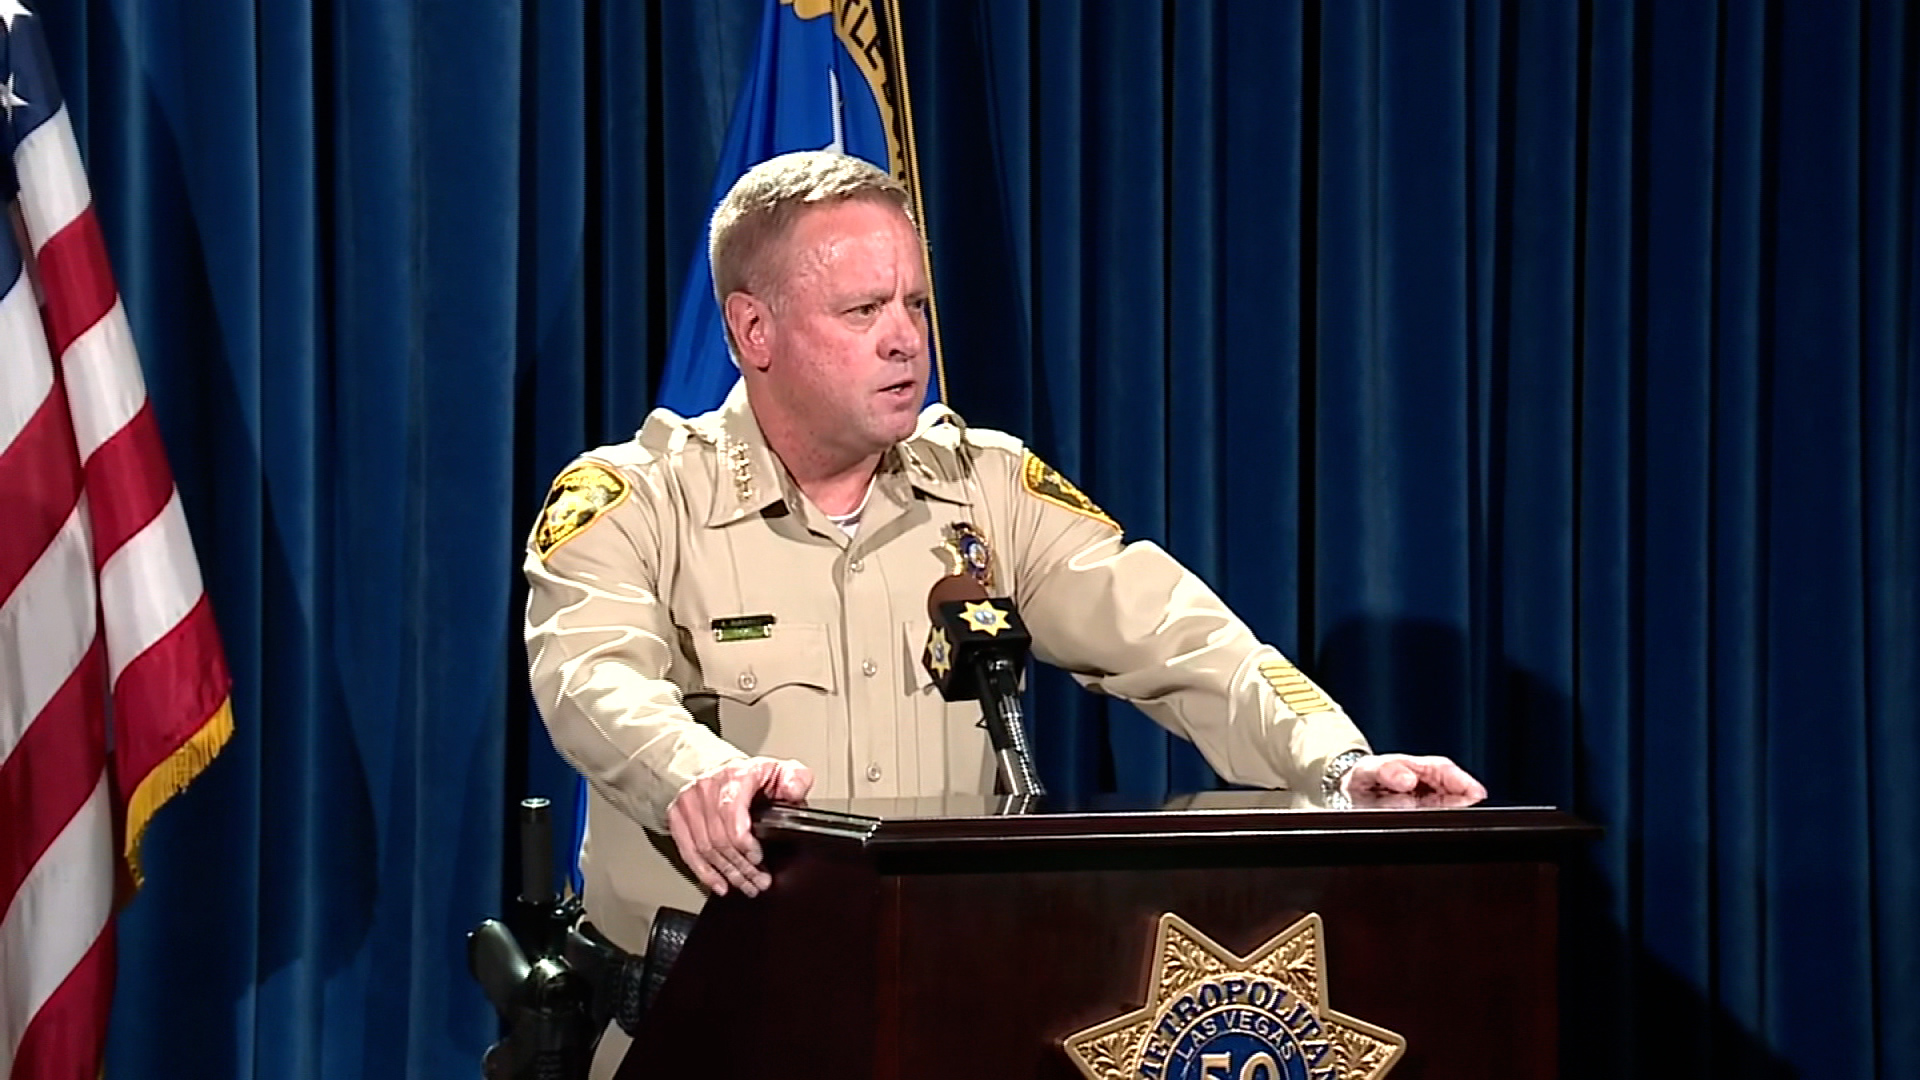 Sheriff Kevin McMahill, with the Las Vegas Metropolitan Police Department, speaks during a press conference on Friday in Las Vegas.